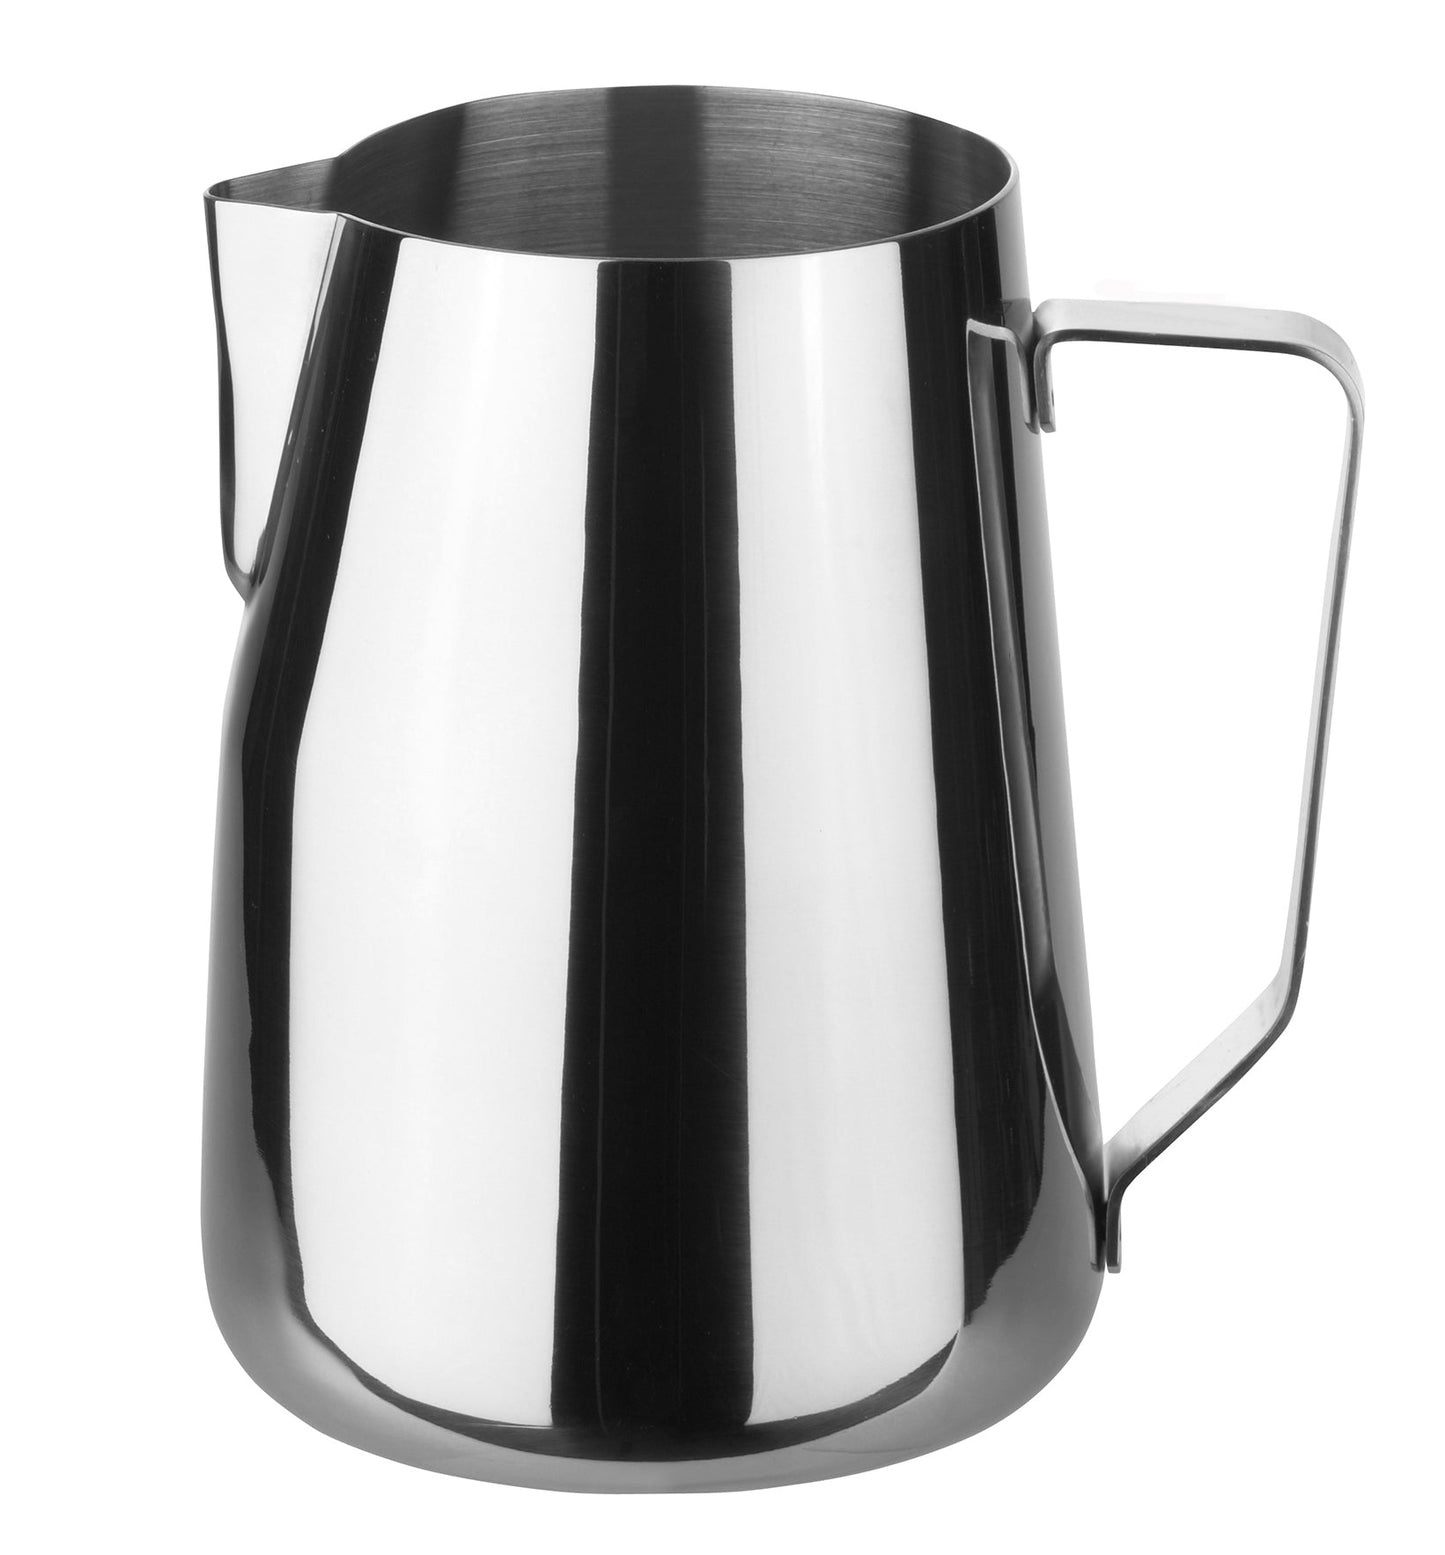 Steaming & Frothing Milk Pitcher Classic Stainless Steel. milk jug for steaming and frothing your milk. perfect barista tool  